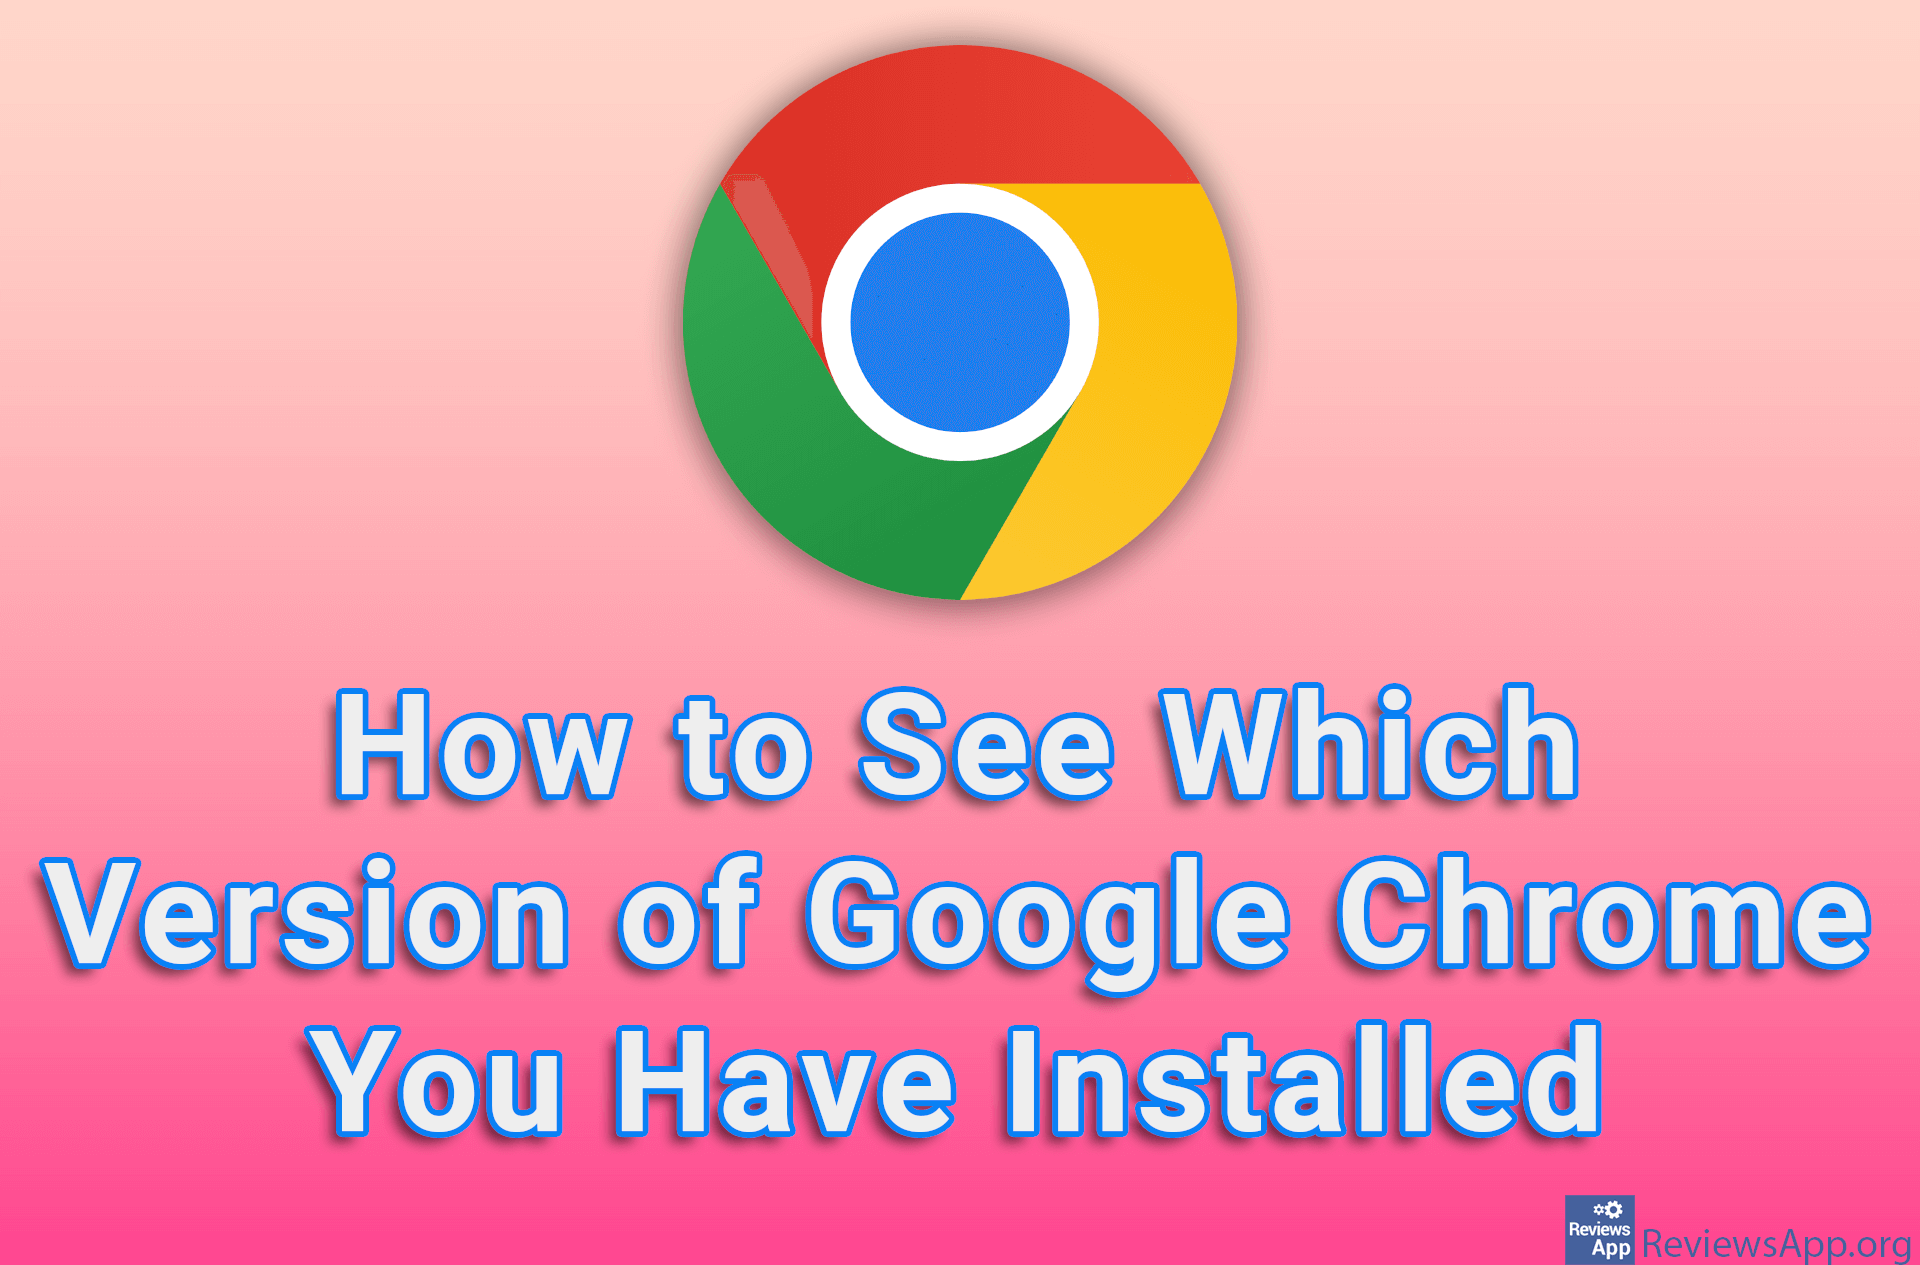 How to See Which Version of Google Chrome You Have Installed